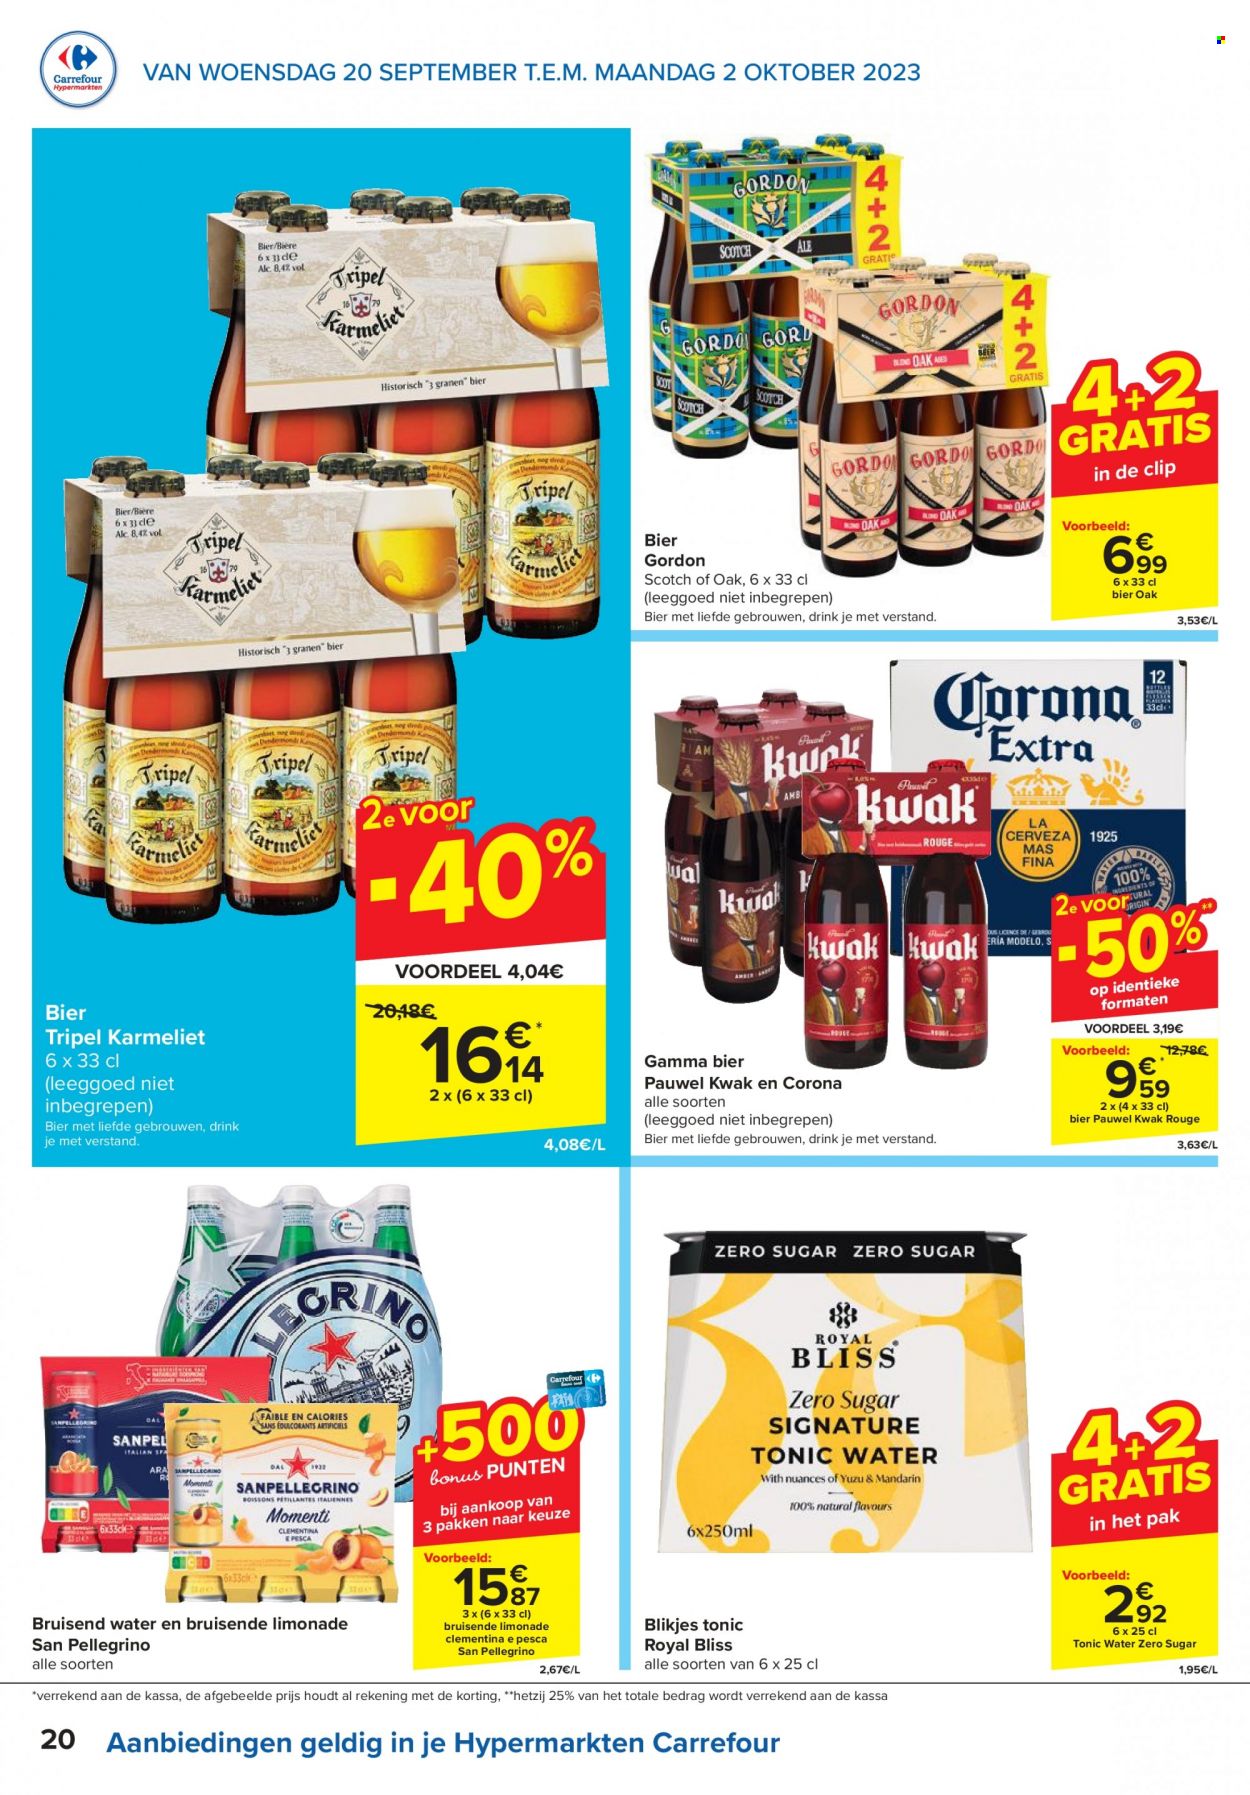 Catalogue Carrefour hypermarkt - 20.9.2023 - 2.10.2023. Page 20.